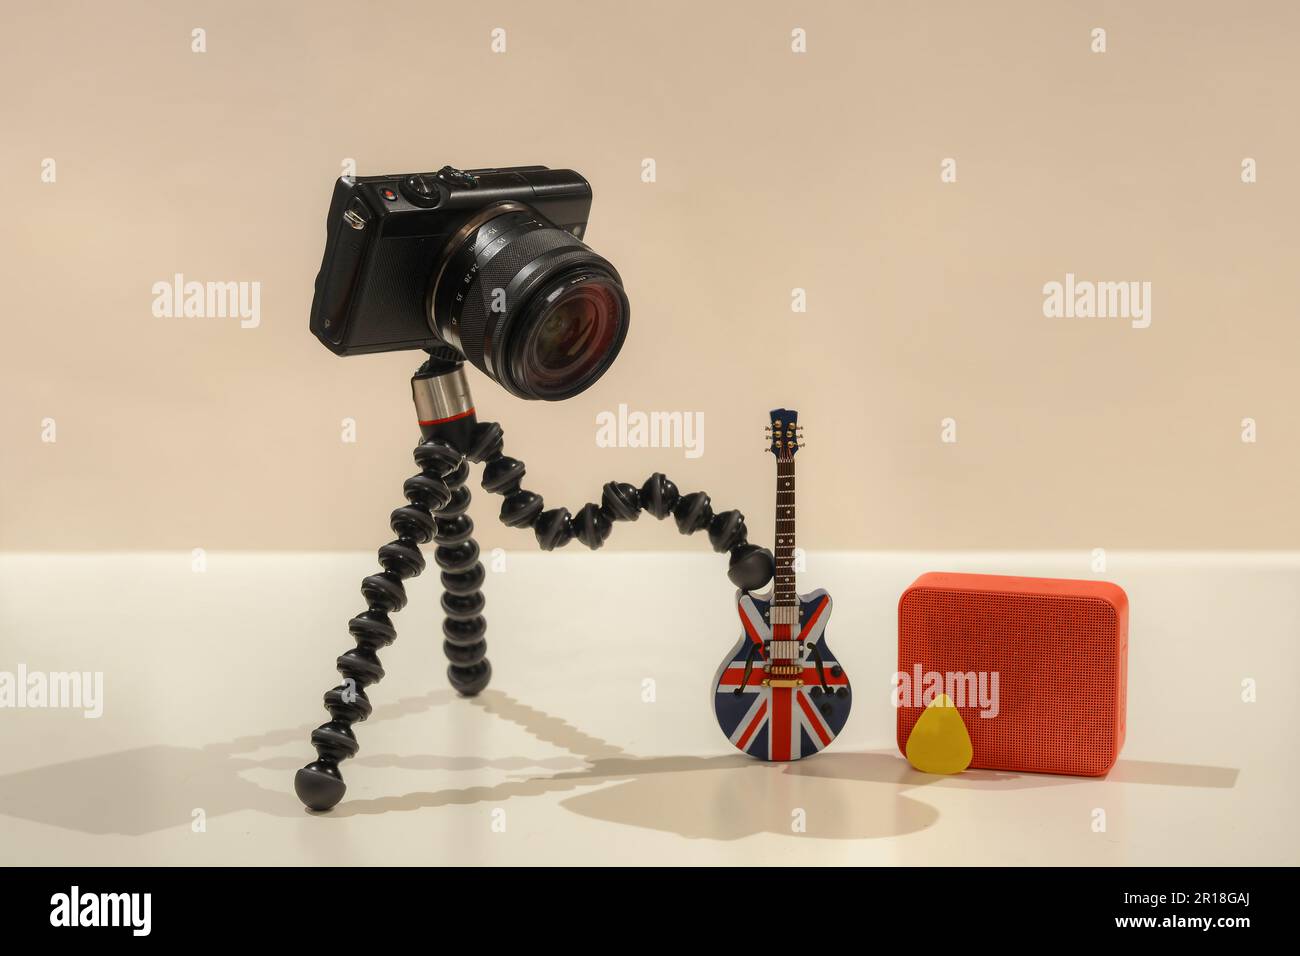 A photo of a camera playing electric guitar with a orange amplifier on the background with white background texture and a yellow pick Stock Photo